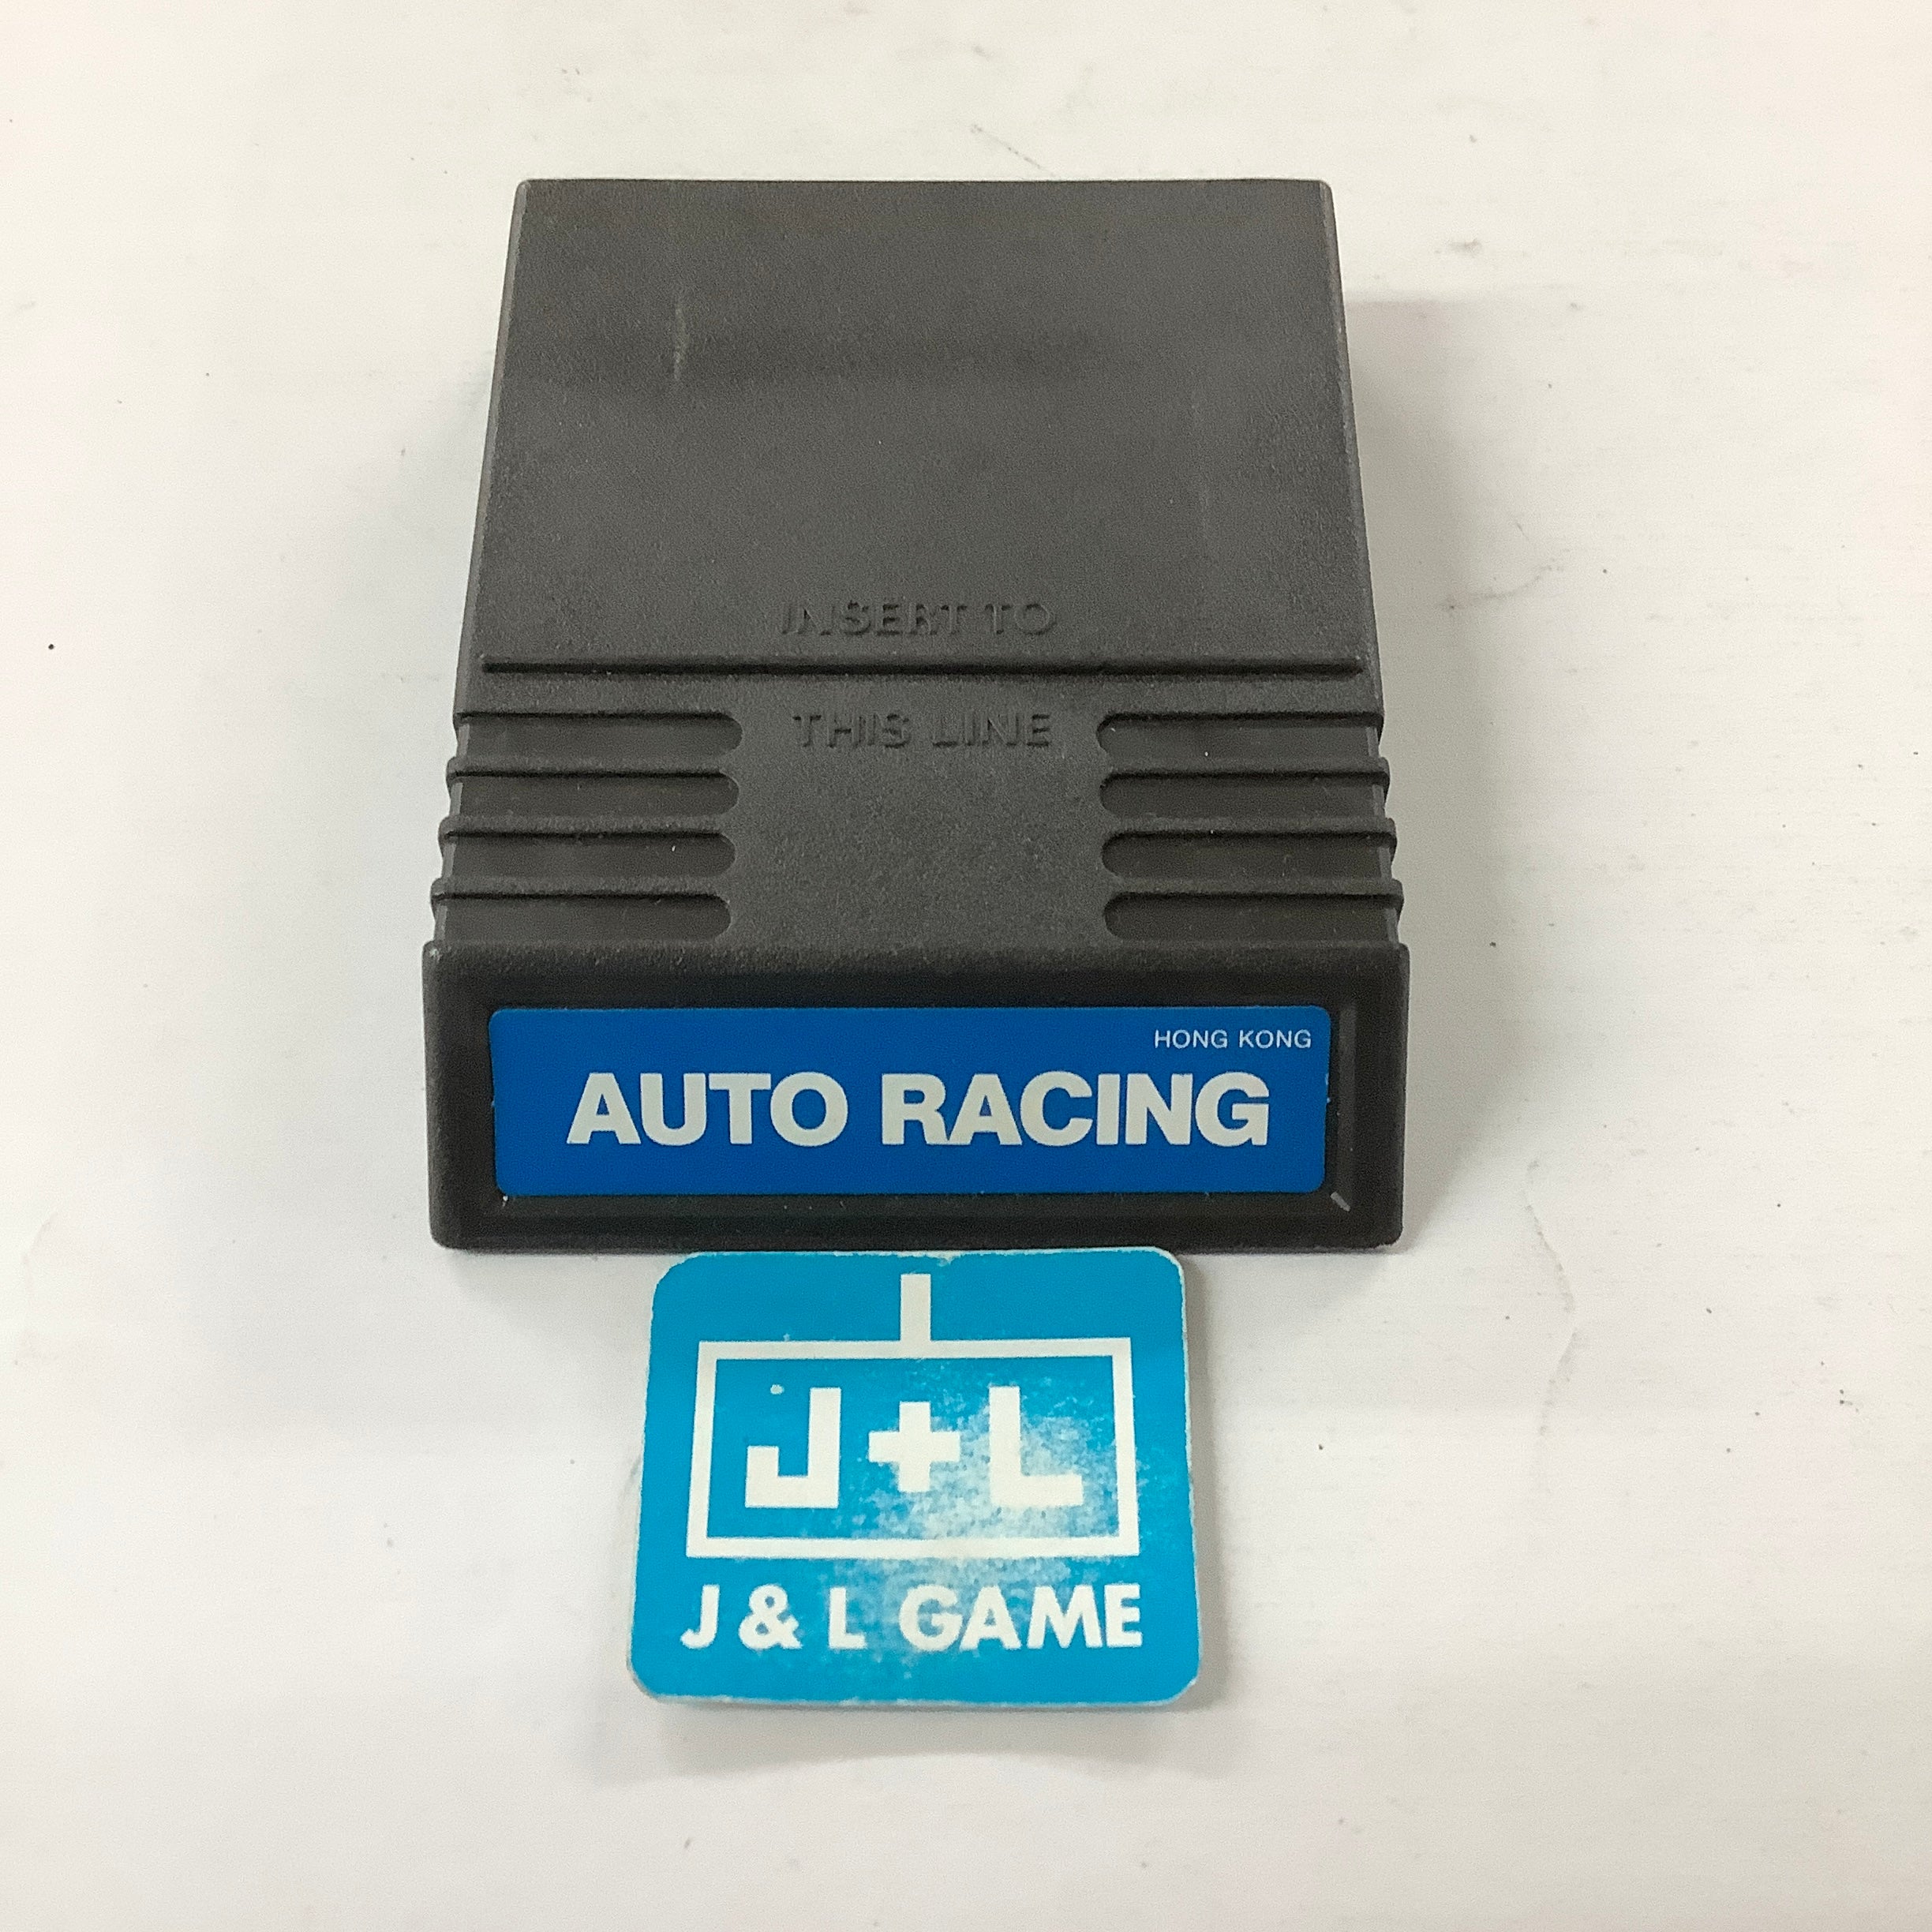 Auto Racing - (INTV) Intellivision [Pre-Owned] Video Games Intellivision Productions   